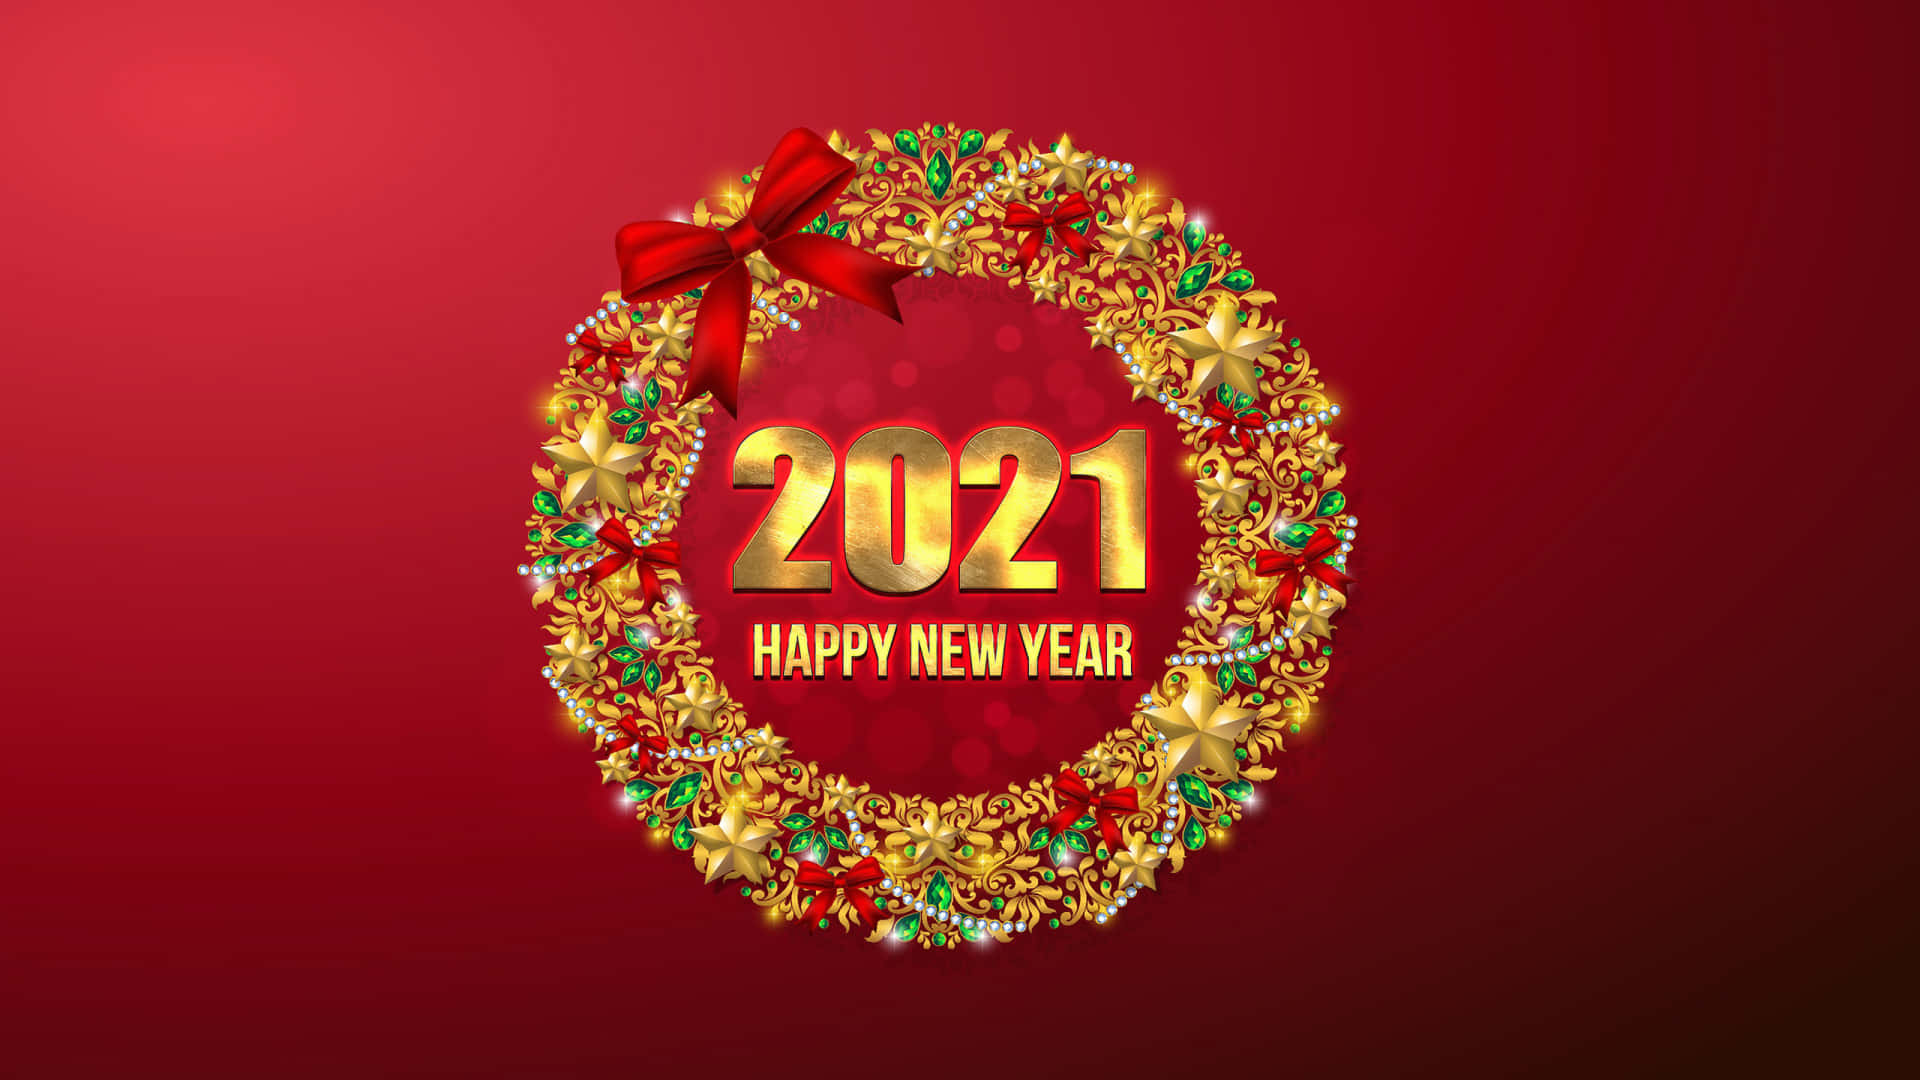 2021 Happy New Year Background With Golden Wreath